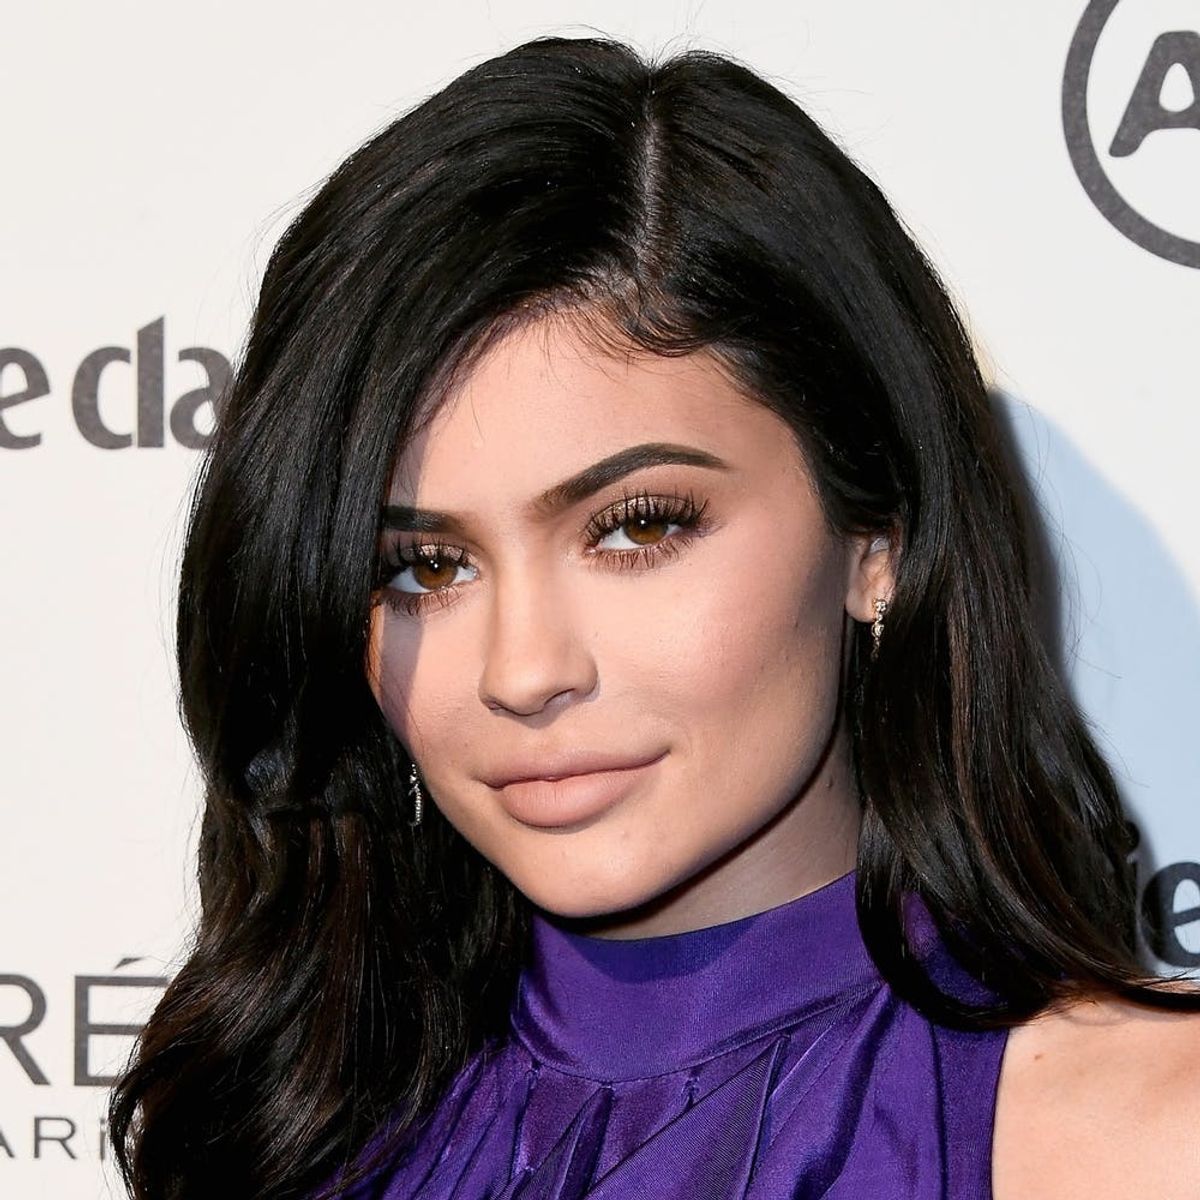 Kylie Jenner’s Reason for Keeping Her Pregnancy Secret Is Backed by Science